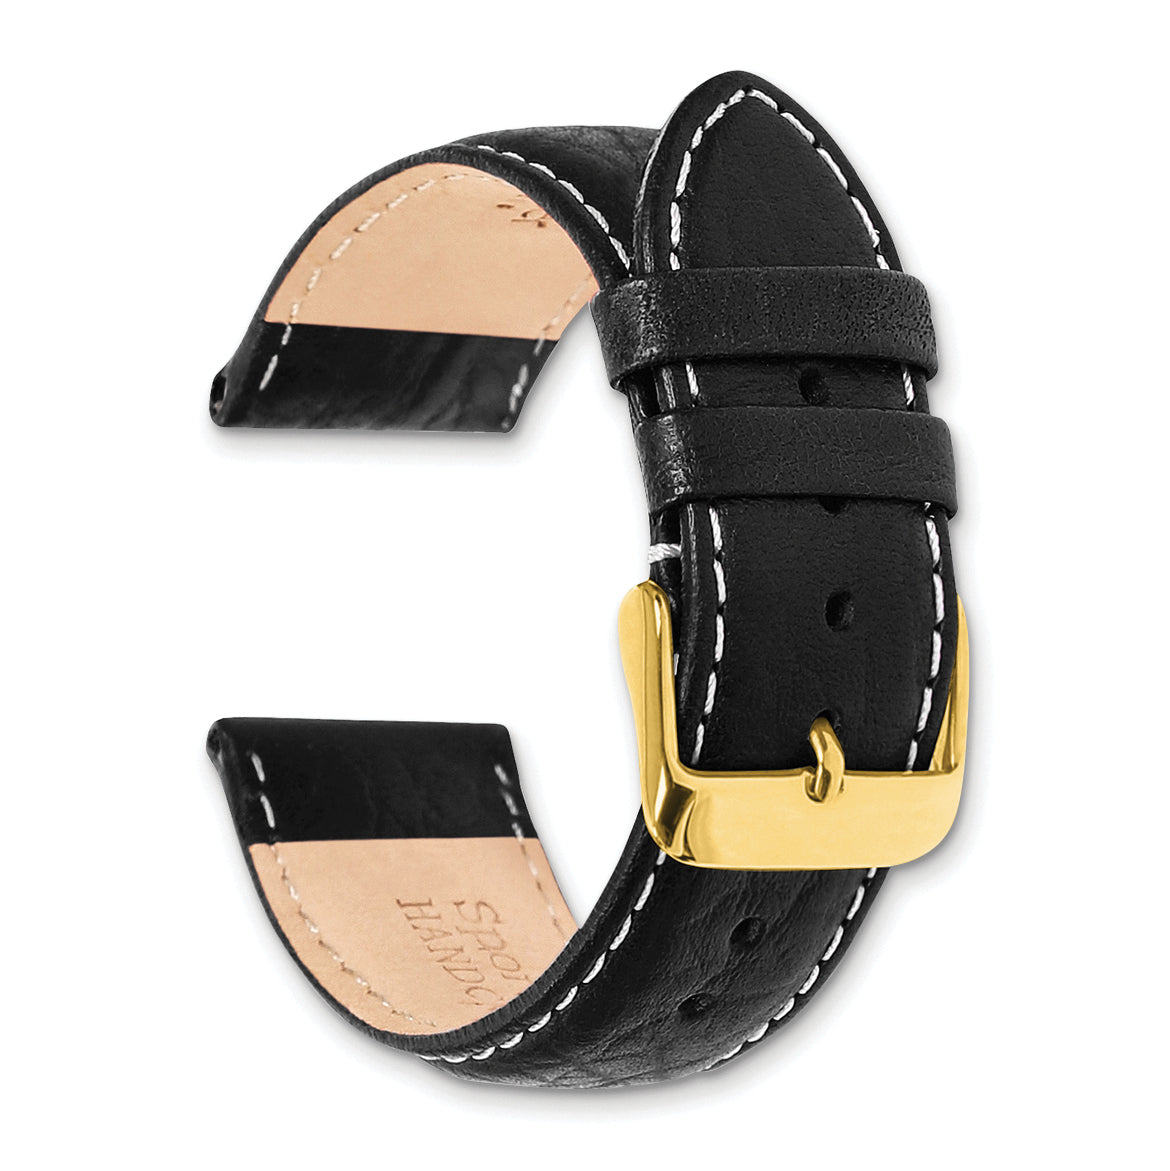 12mm Black Sport Leather with White Stitching and Gold-tone Buckle 6.75 inch Watch Band